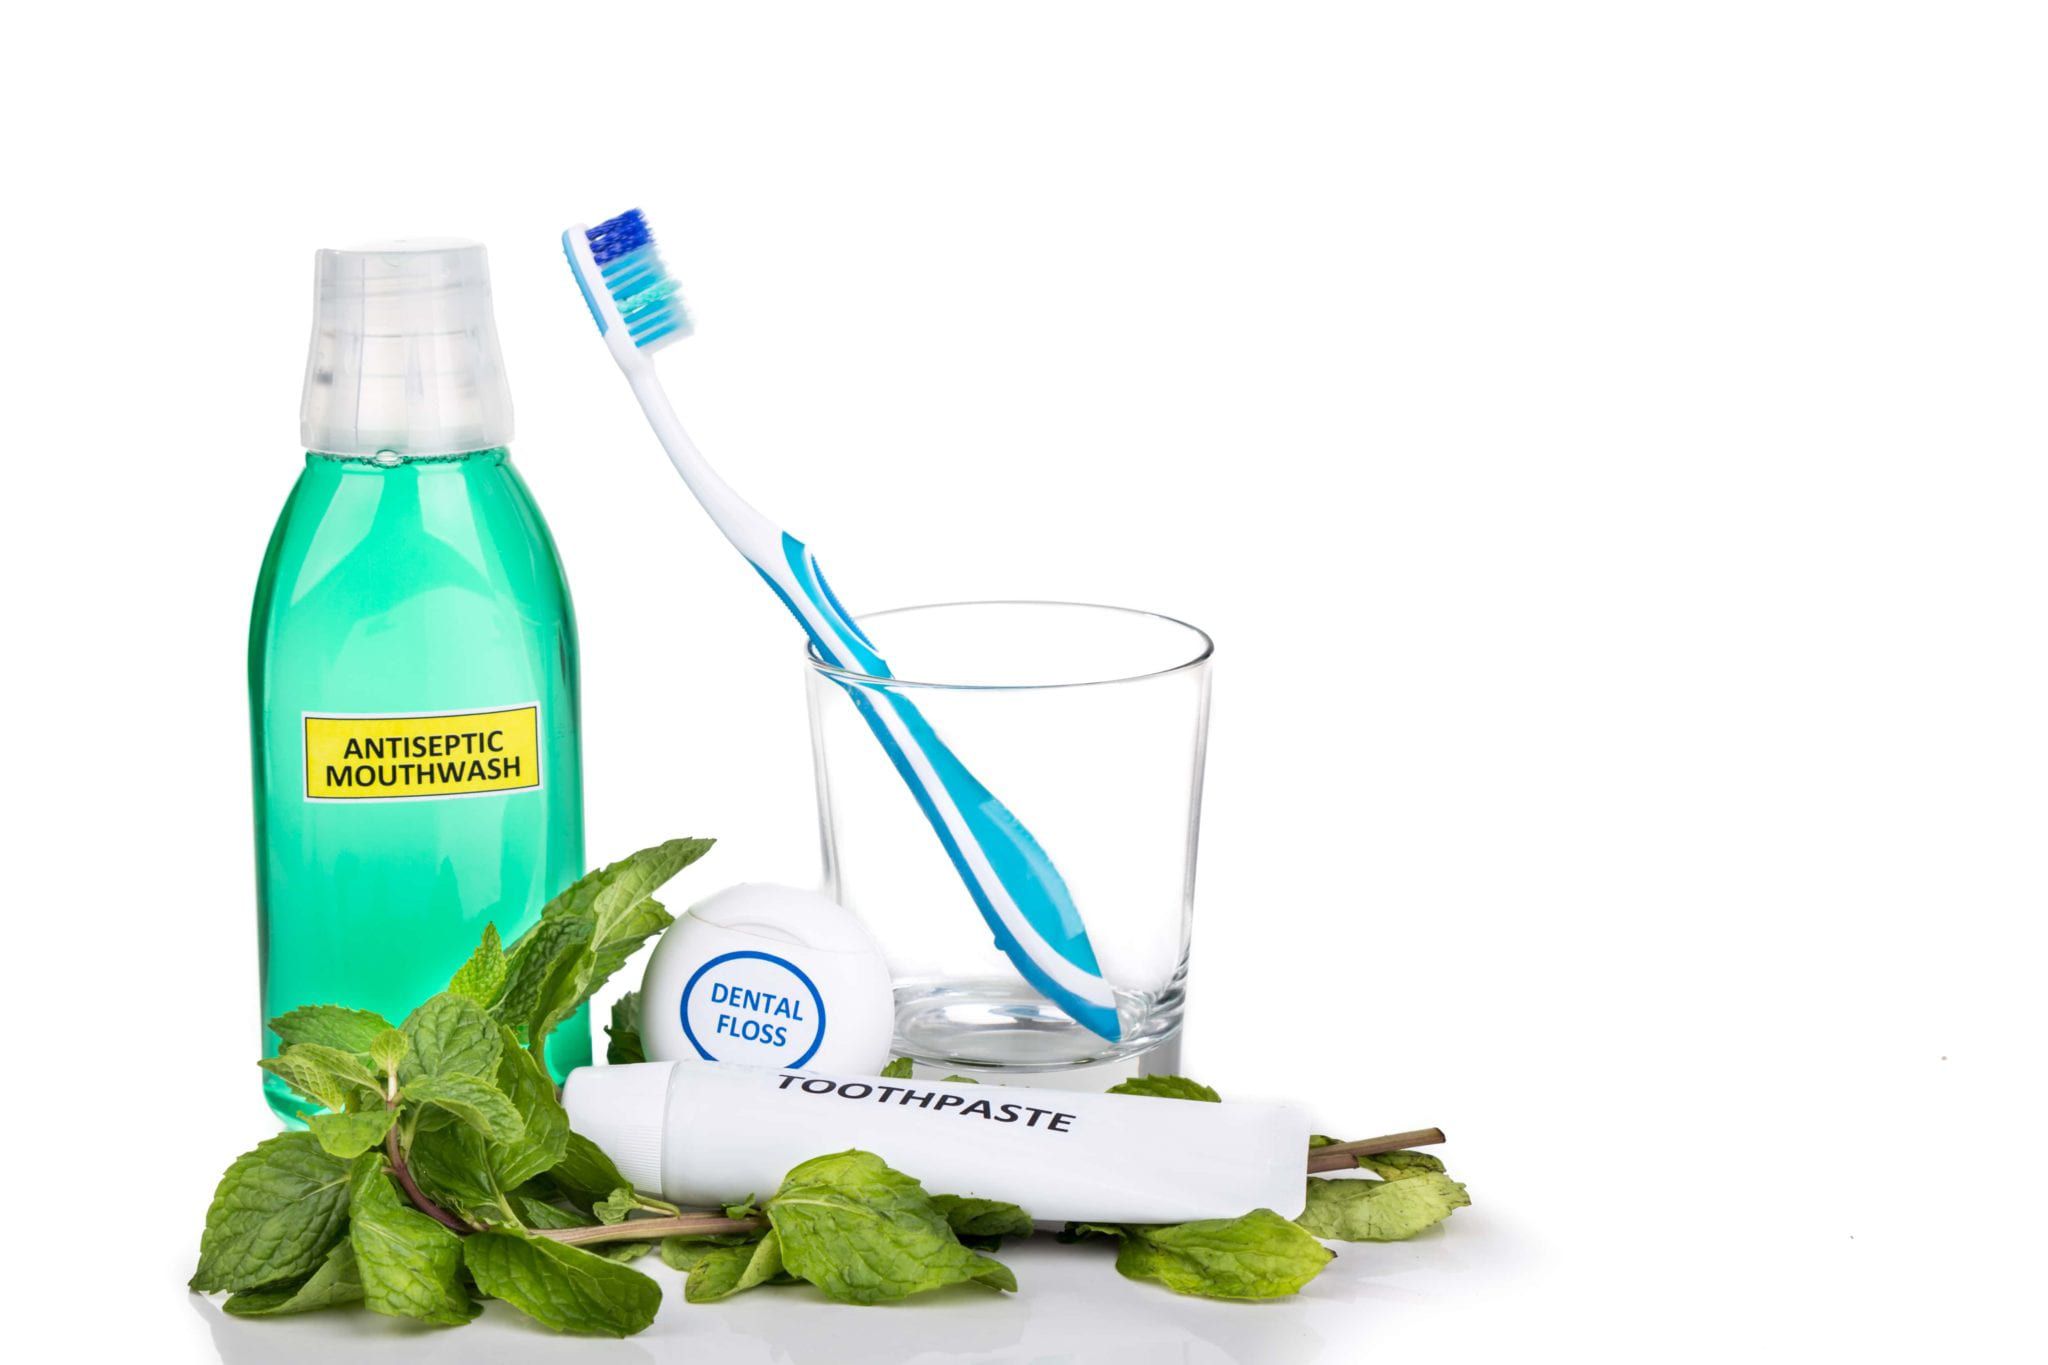 Mouthwash, toothbrush, floss, and toothpaste on a white background surrounded by mint leaves